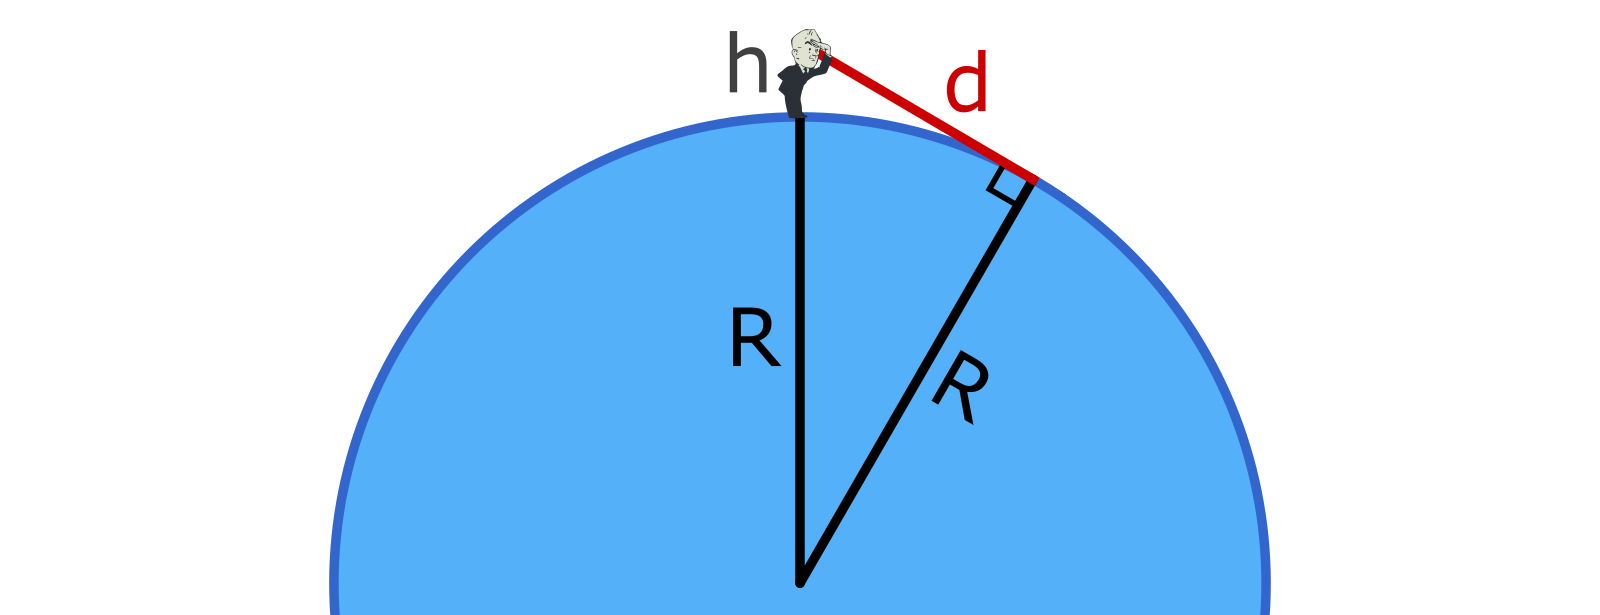 A diagram showing how a right angle is formed between an Earth radius and the horizon sight line.